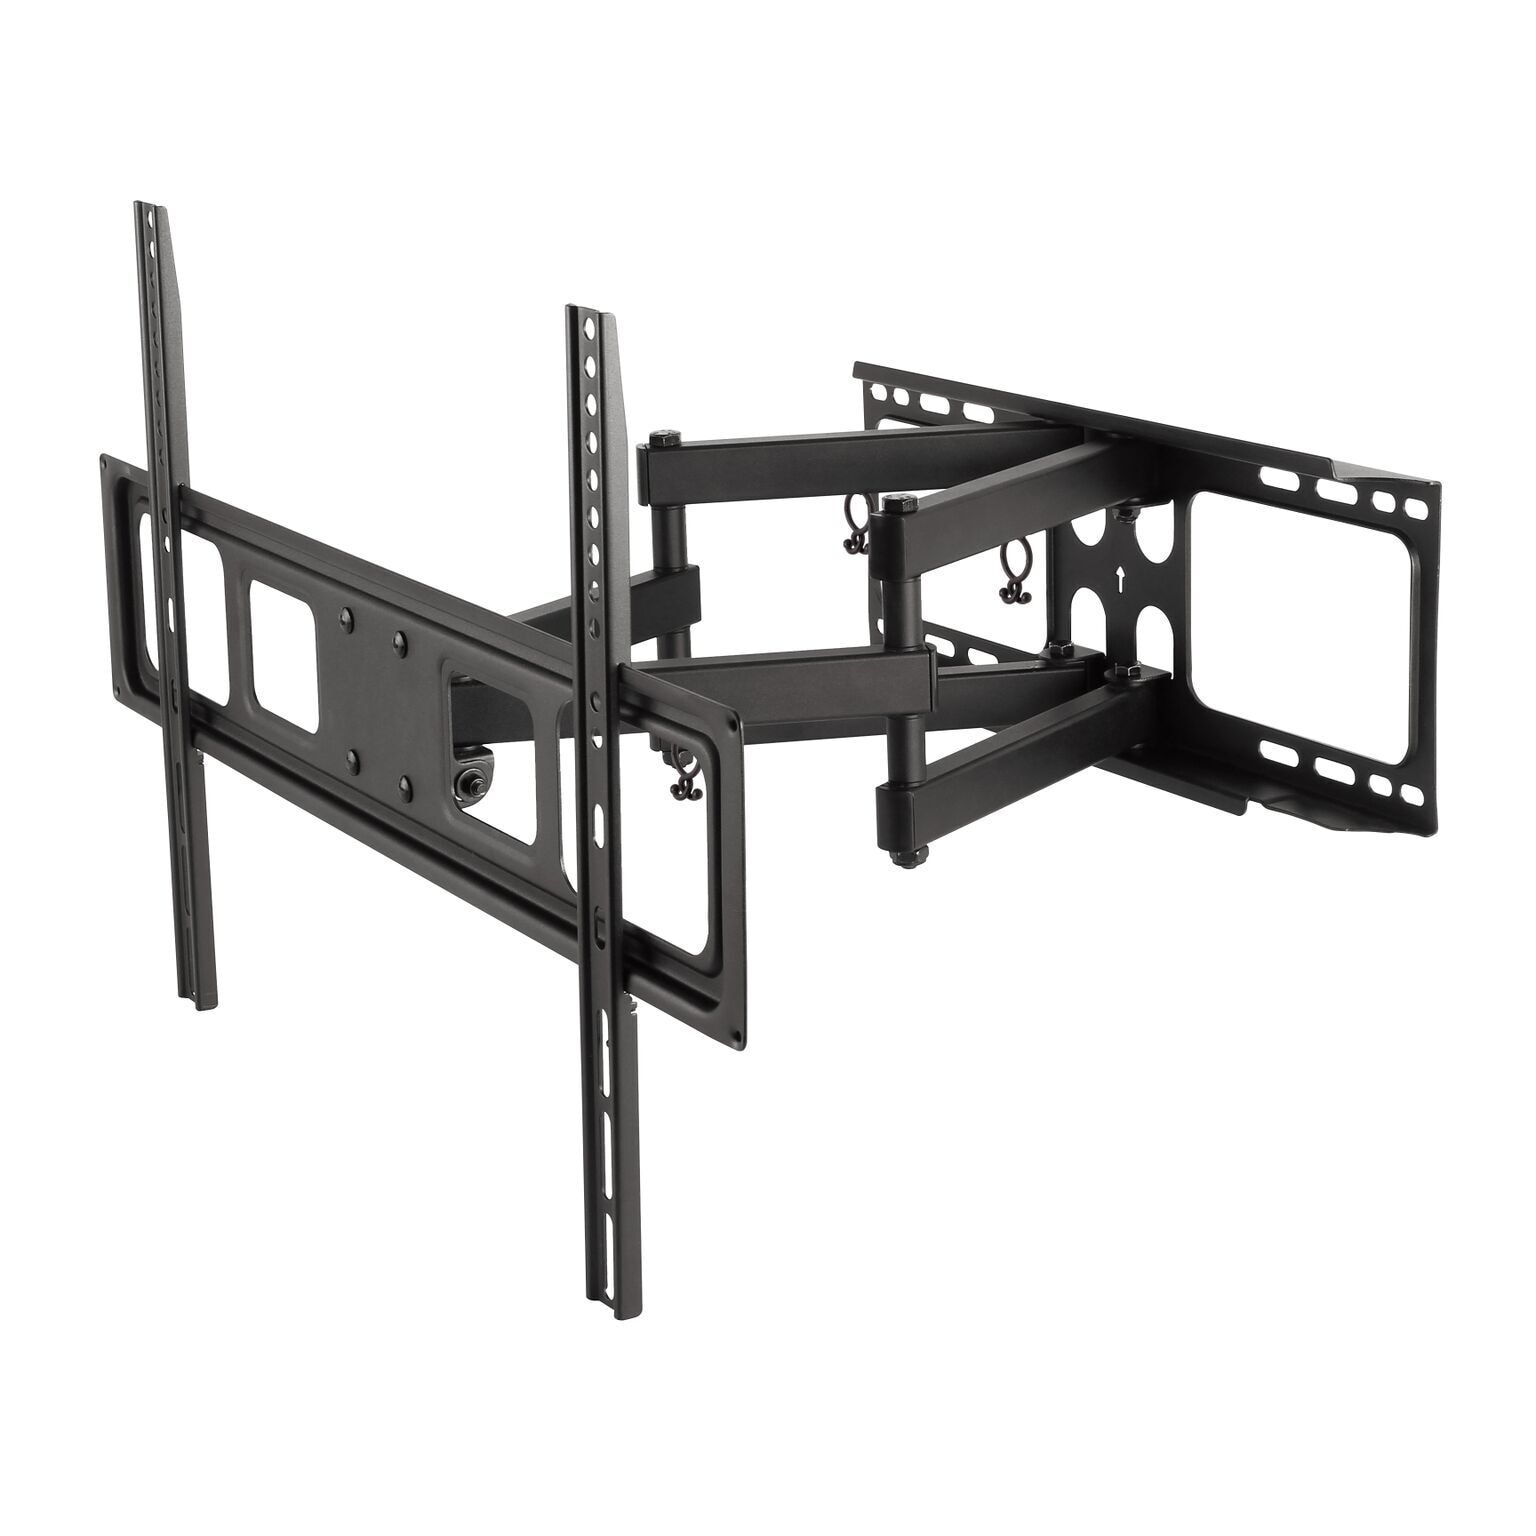 Promounts Full Motion Wall Tv Mount Fits TVs up to 85-in (Hardware Included)